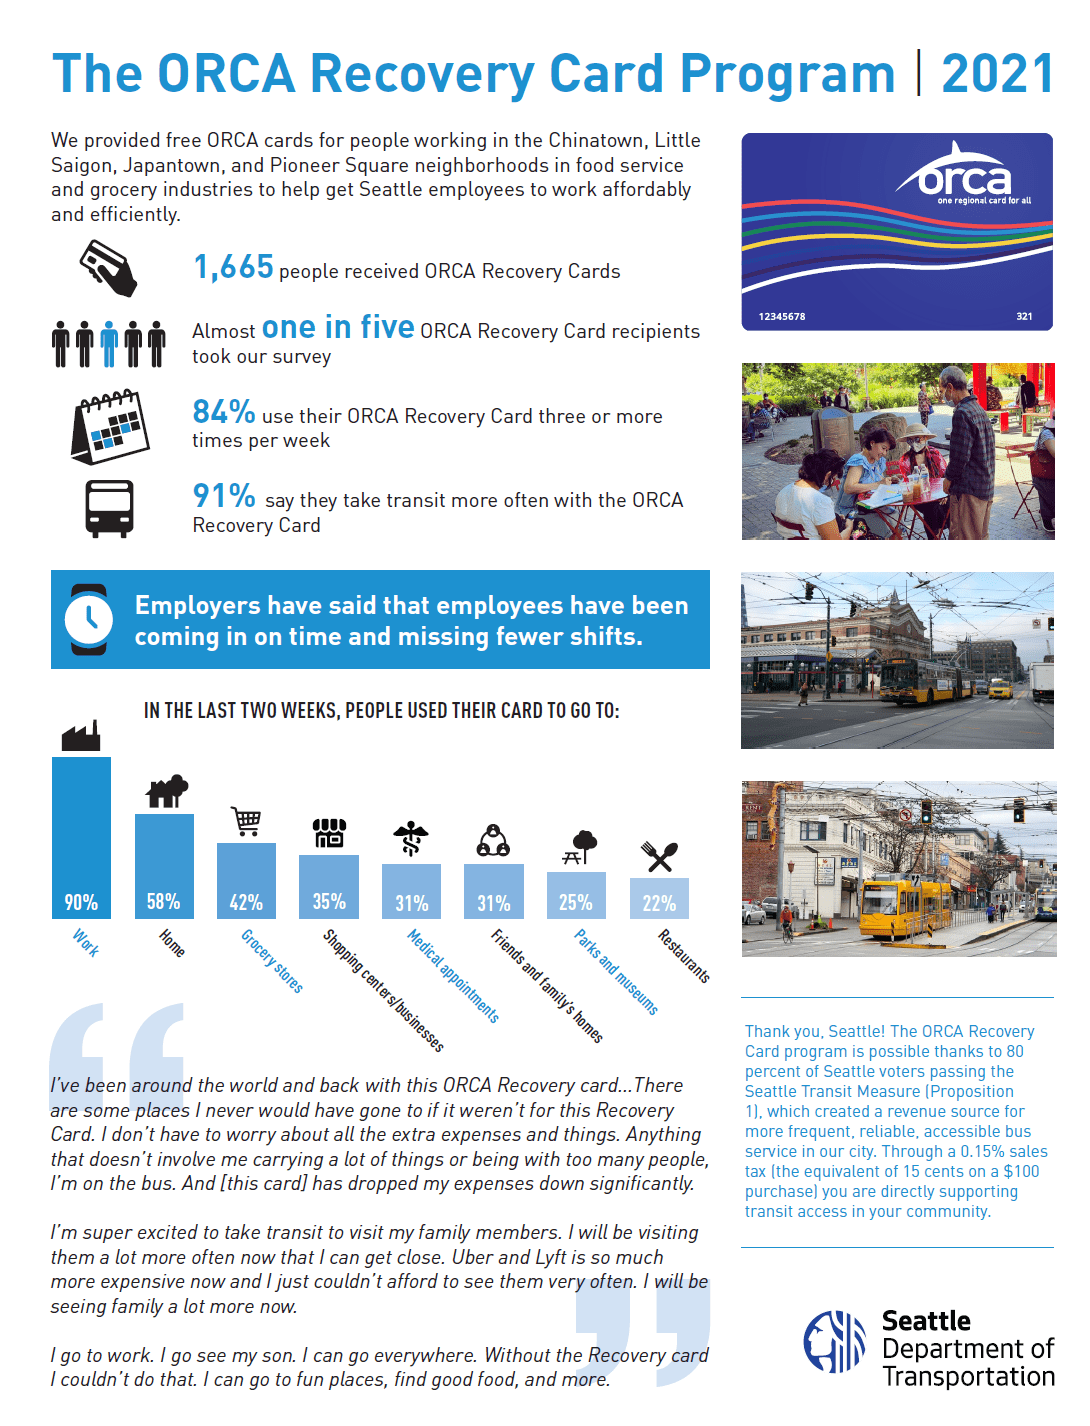 Infographic showcasing details about the ORCA Recovery Card program, including its usage and public feedback regarding the program from its participants. The image includes a bar chart, quotes from survey takers, and images of transit in Seattle.